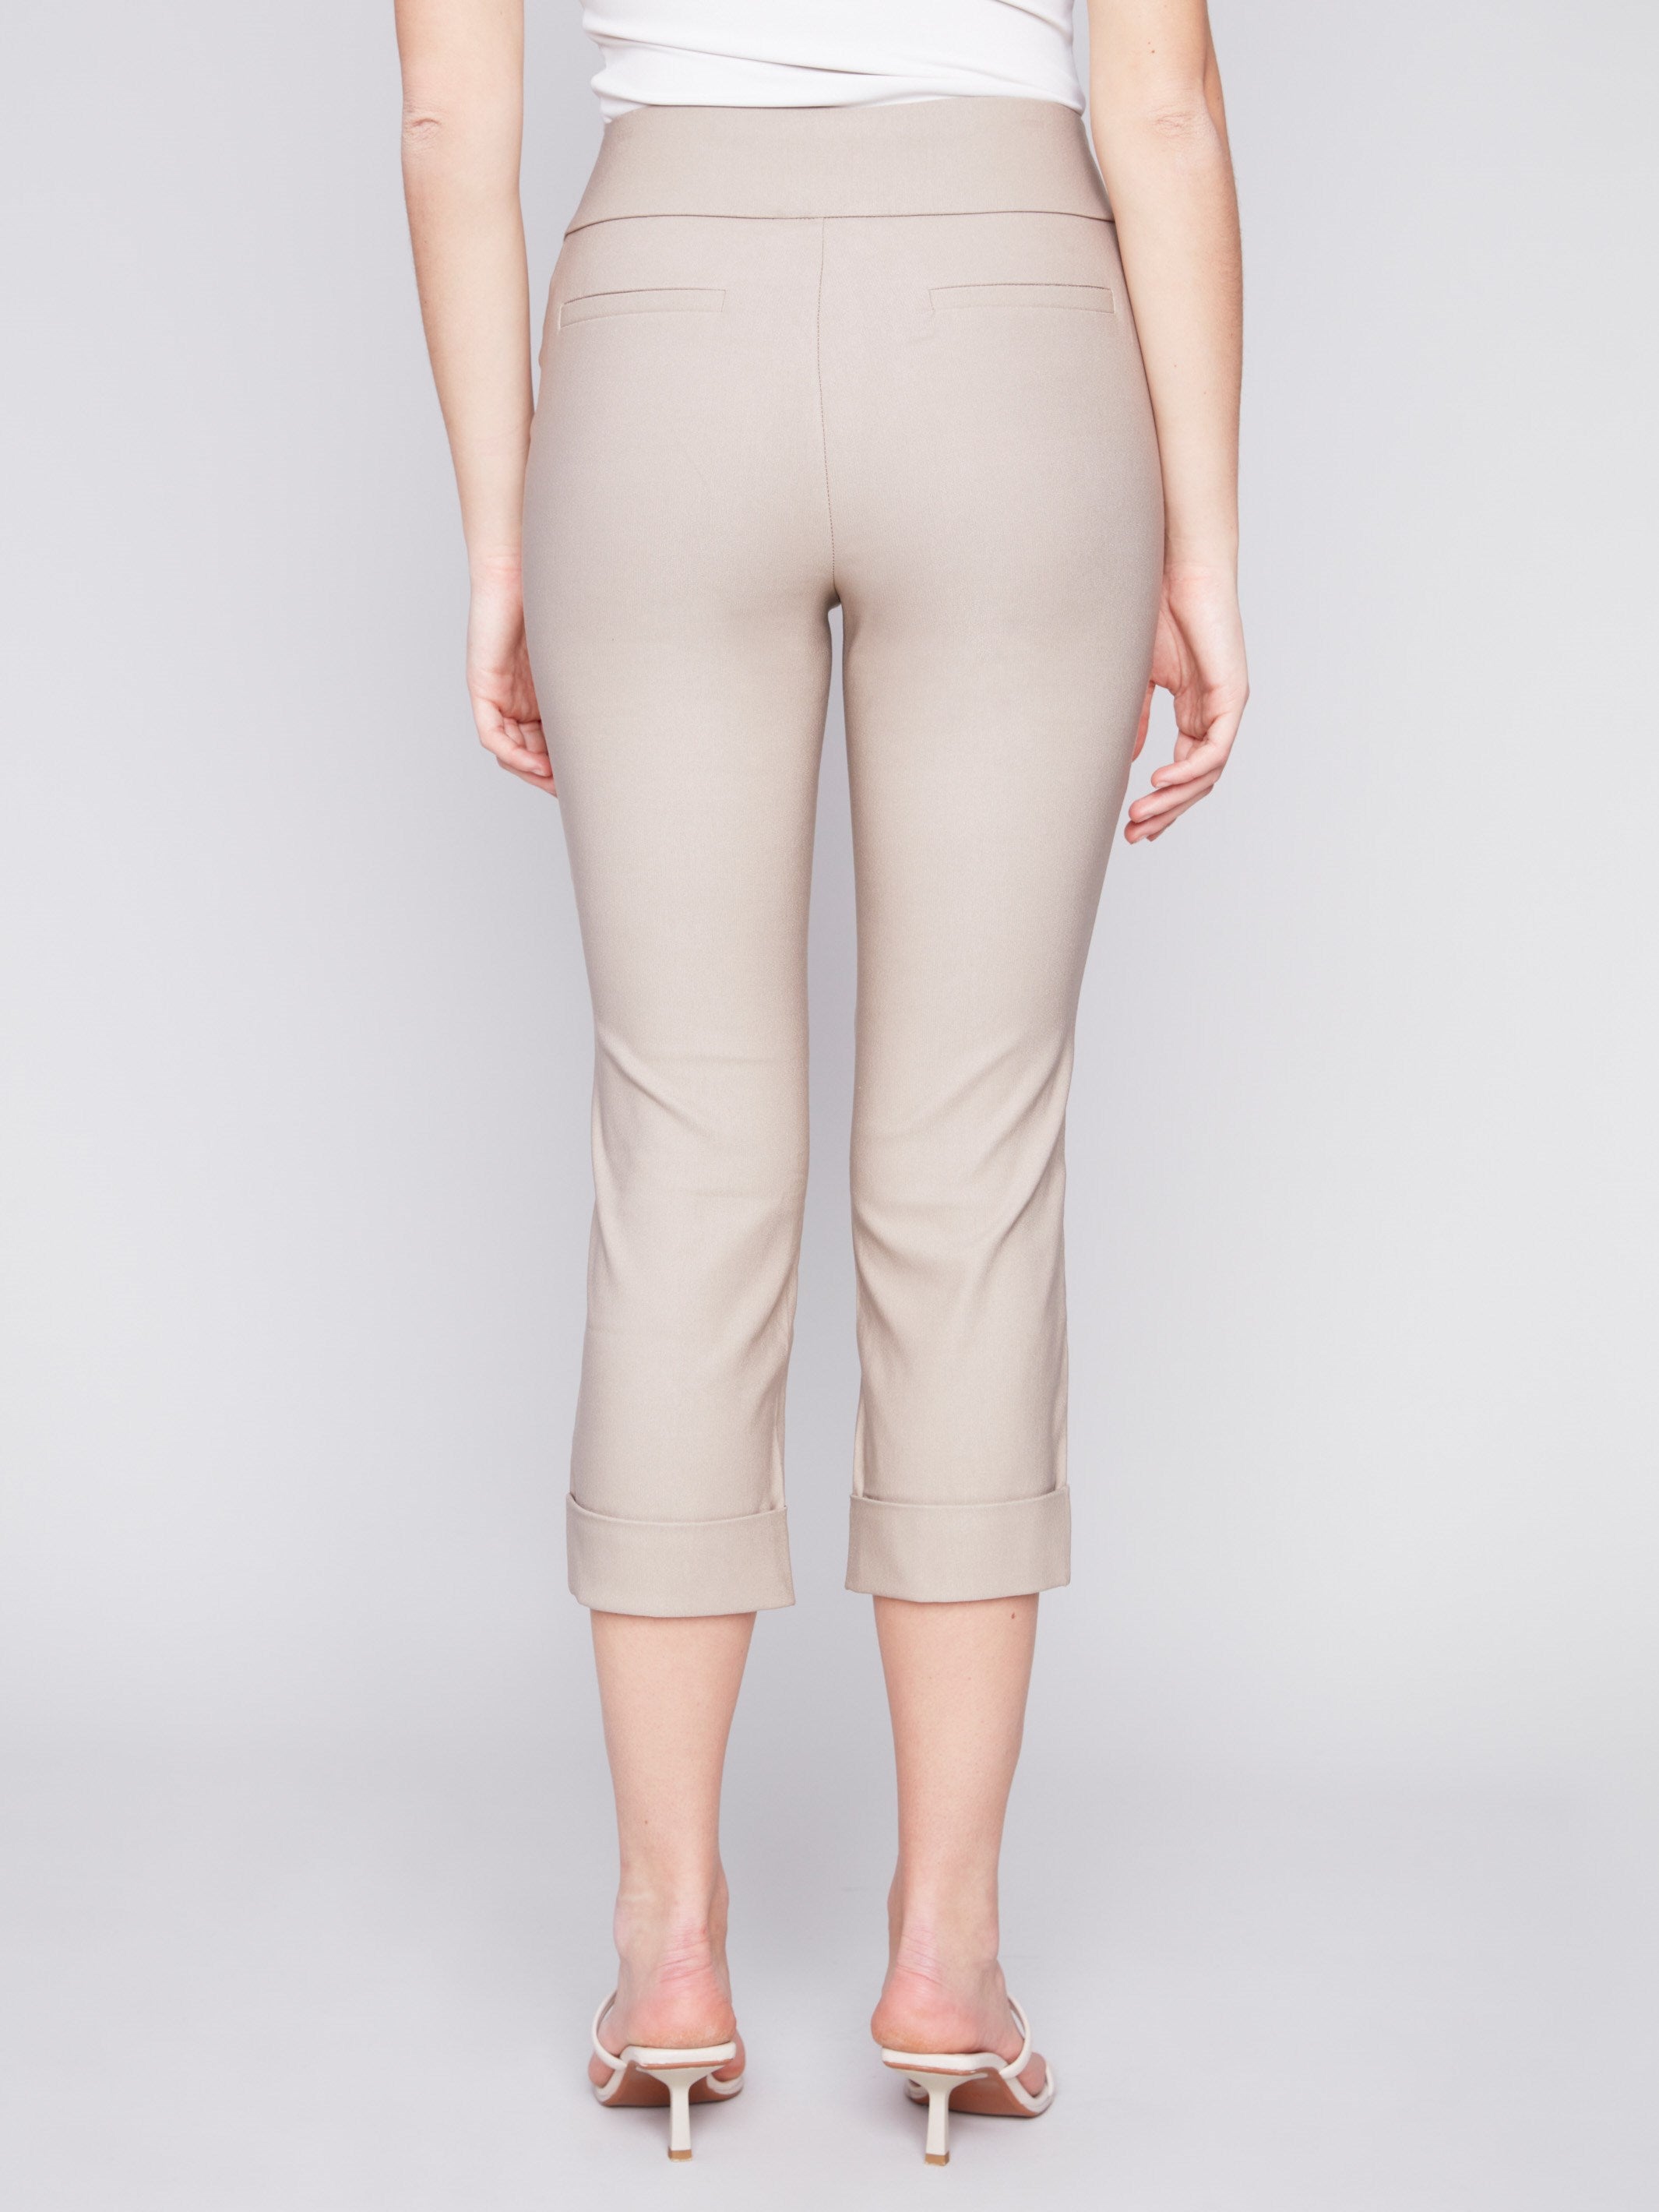 Stretch Pull-On Capri Pants - Greige - Charlie B Collection Canada - Image 4